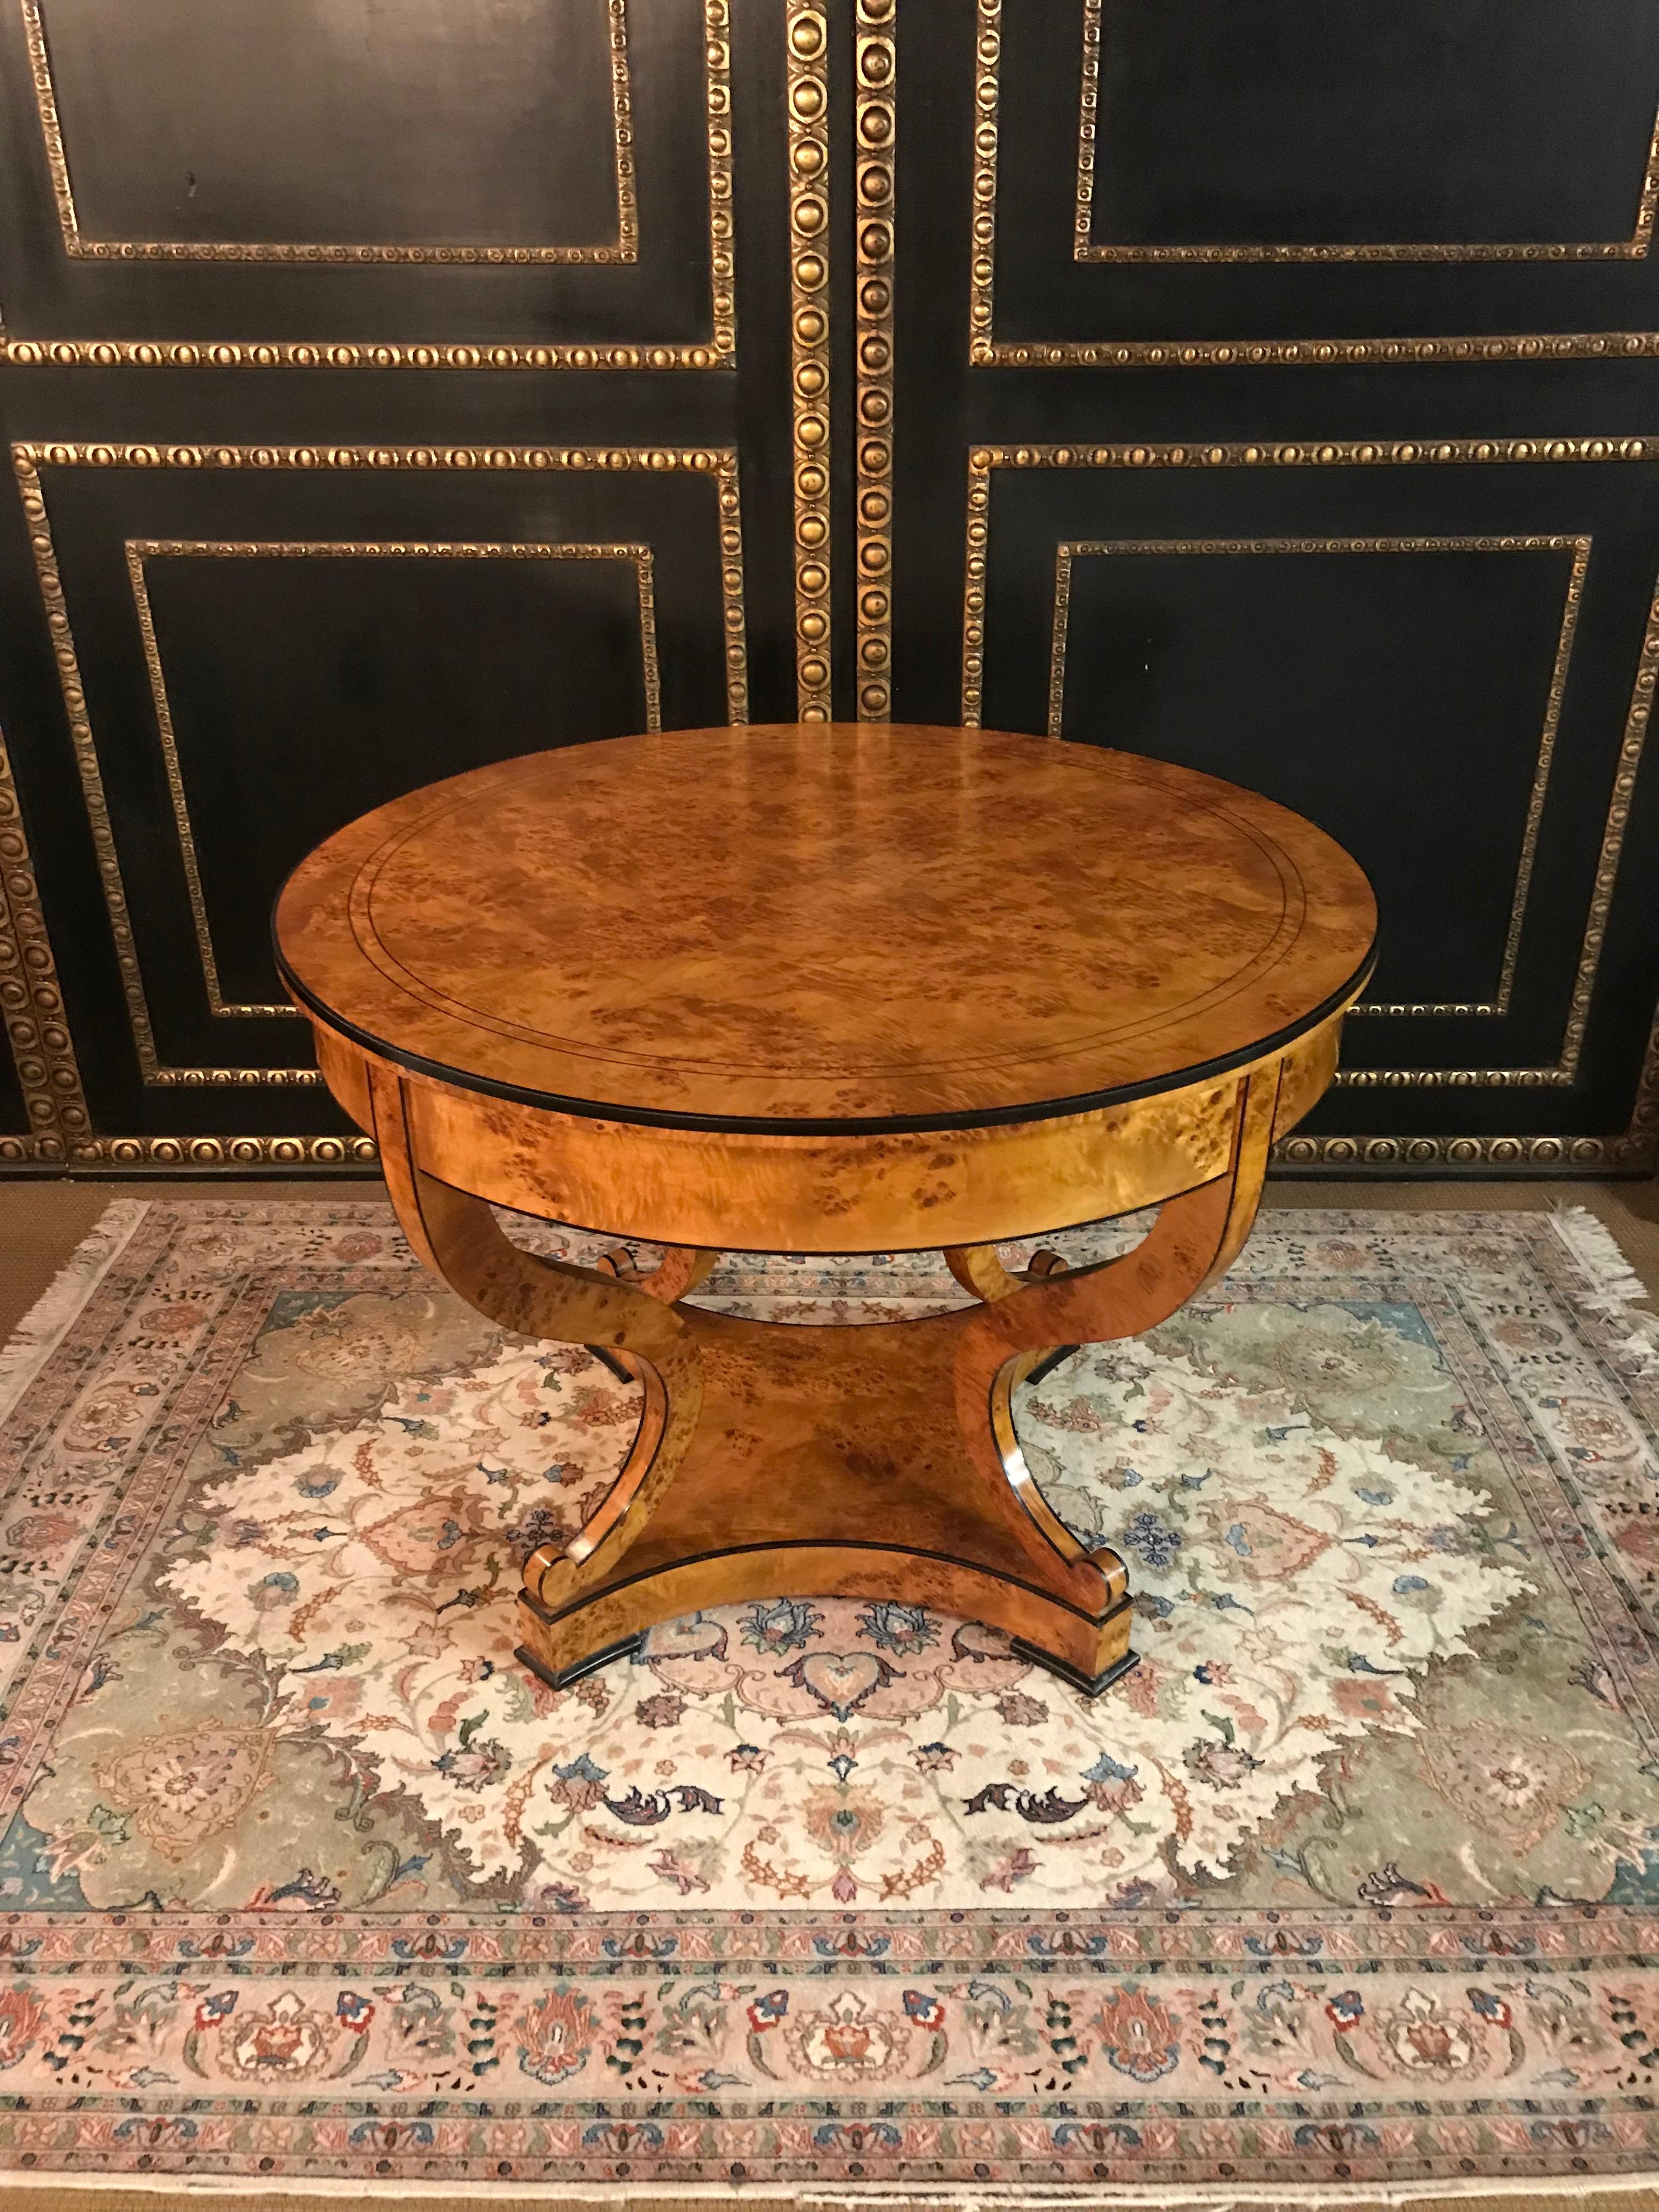 Highly valuable bird’s-eye maple veneer on solid pinewood bowed borders on
sabre-formed conical, tapered four edged legs. Four-sided retracted pedestal on
disc feet. Slender overlapping table platter.